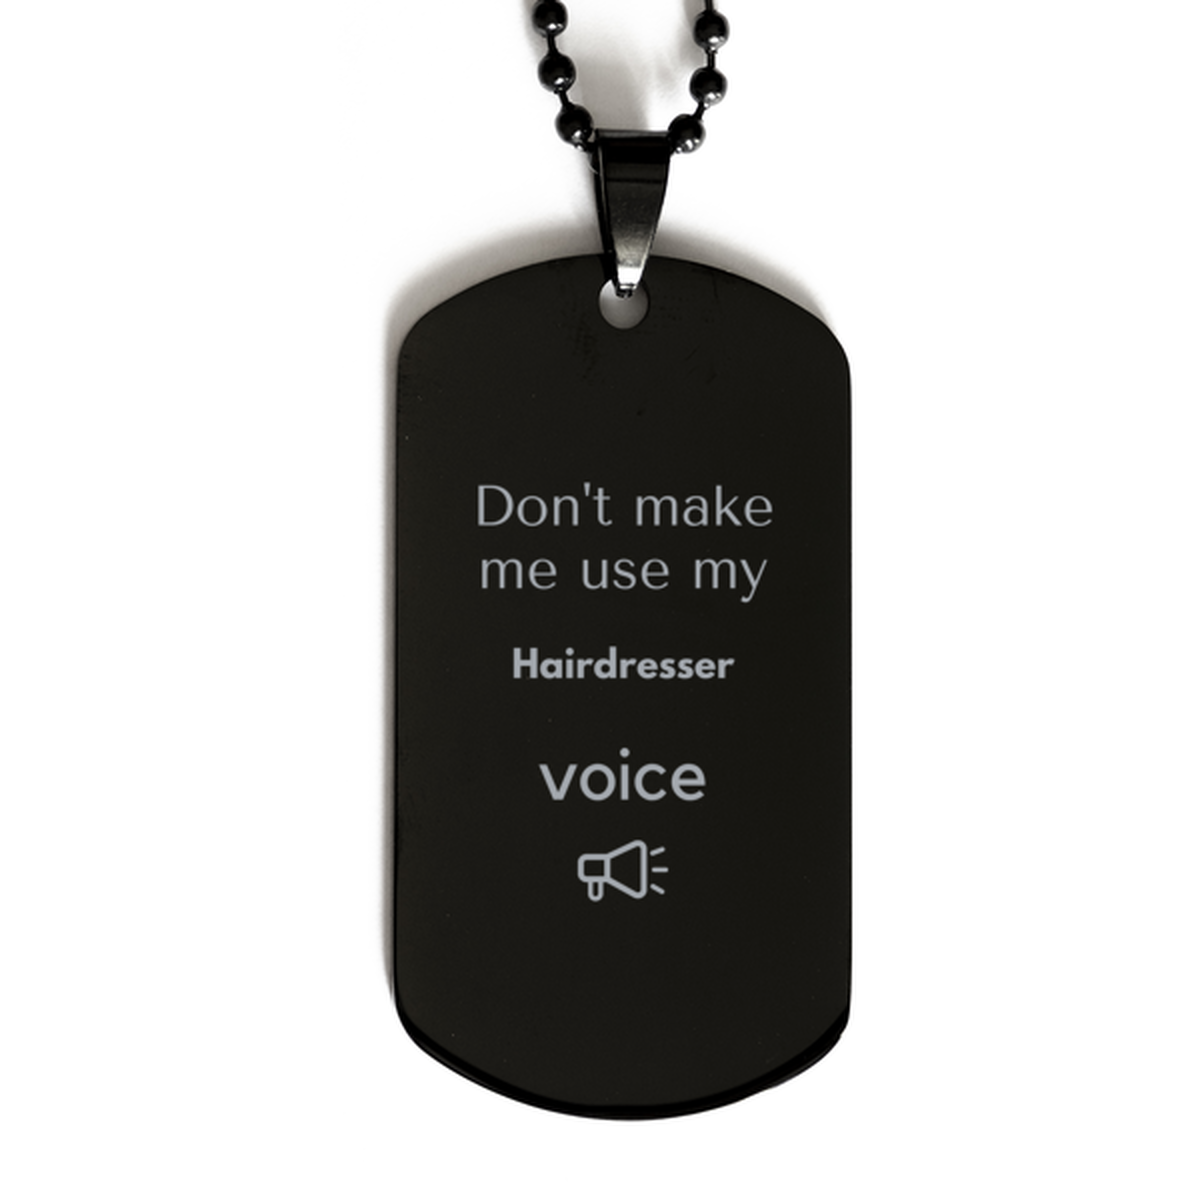 Don't make me use my Hairdresser voice, Sarcasm Hairdresser Gifts, Christmas Hairdresser Black Dog Tag Birthday Unique Gifts For Hairdresser Coworkers, Men, Women, Colleague, Friends